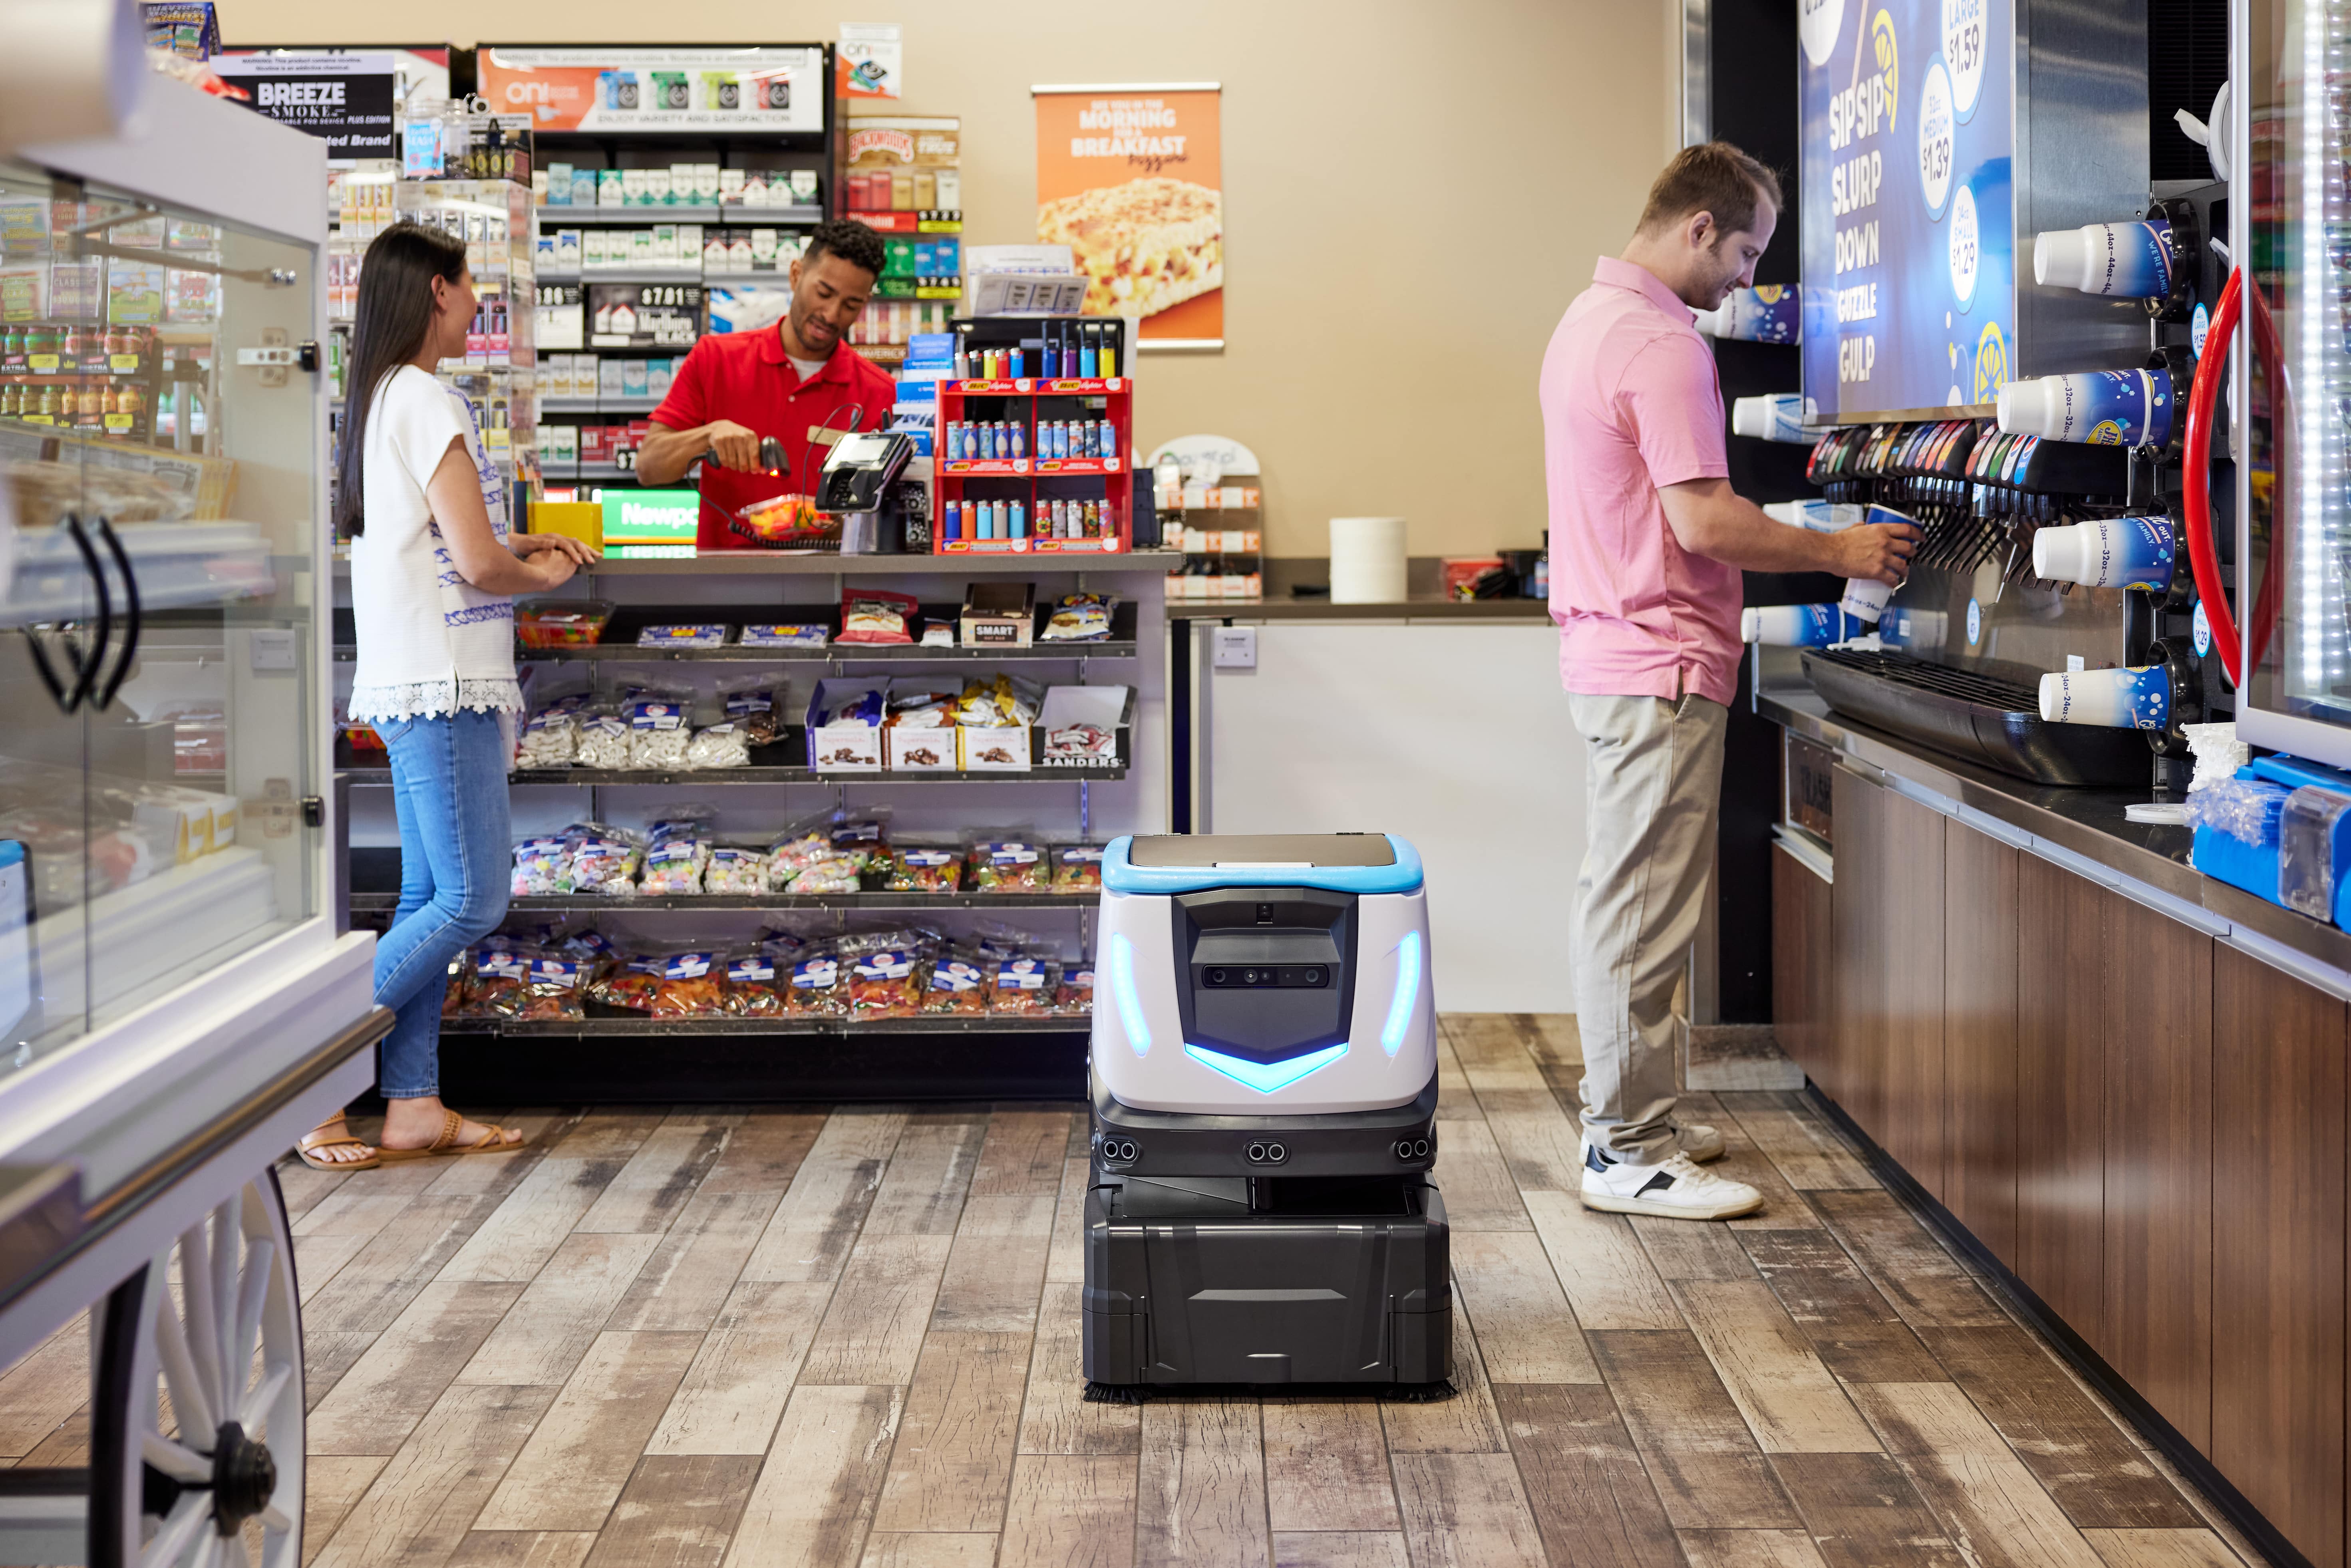 cobi 18 commercial robotic scrubber supporting convenience store workers